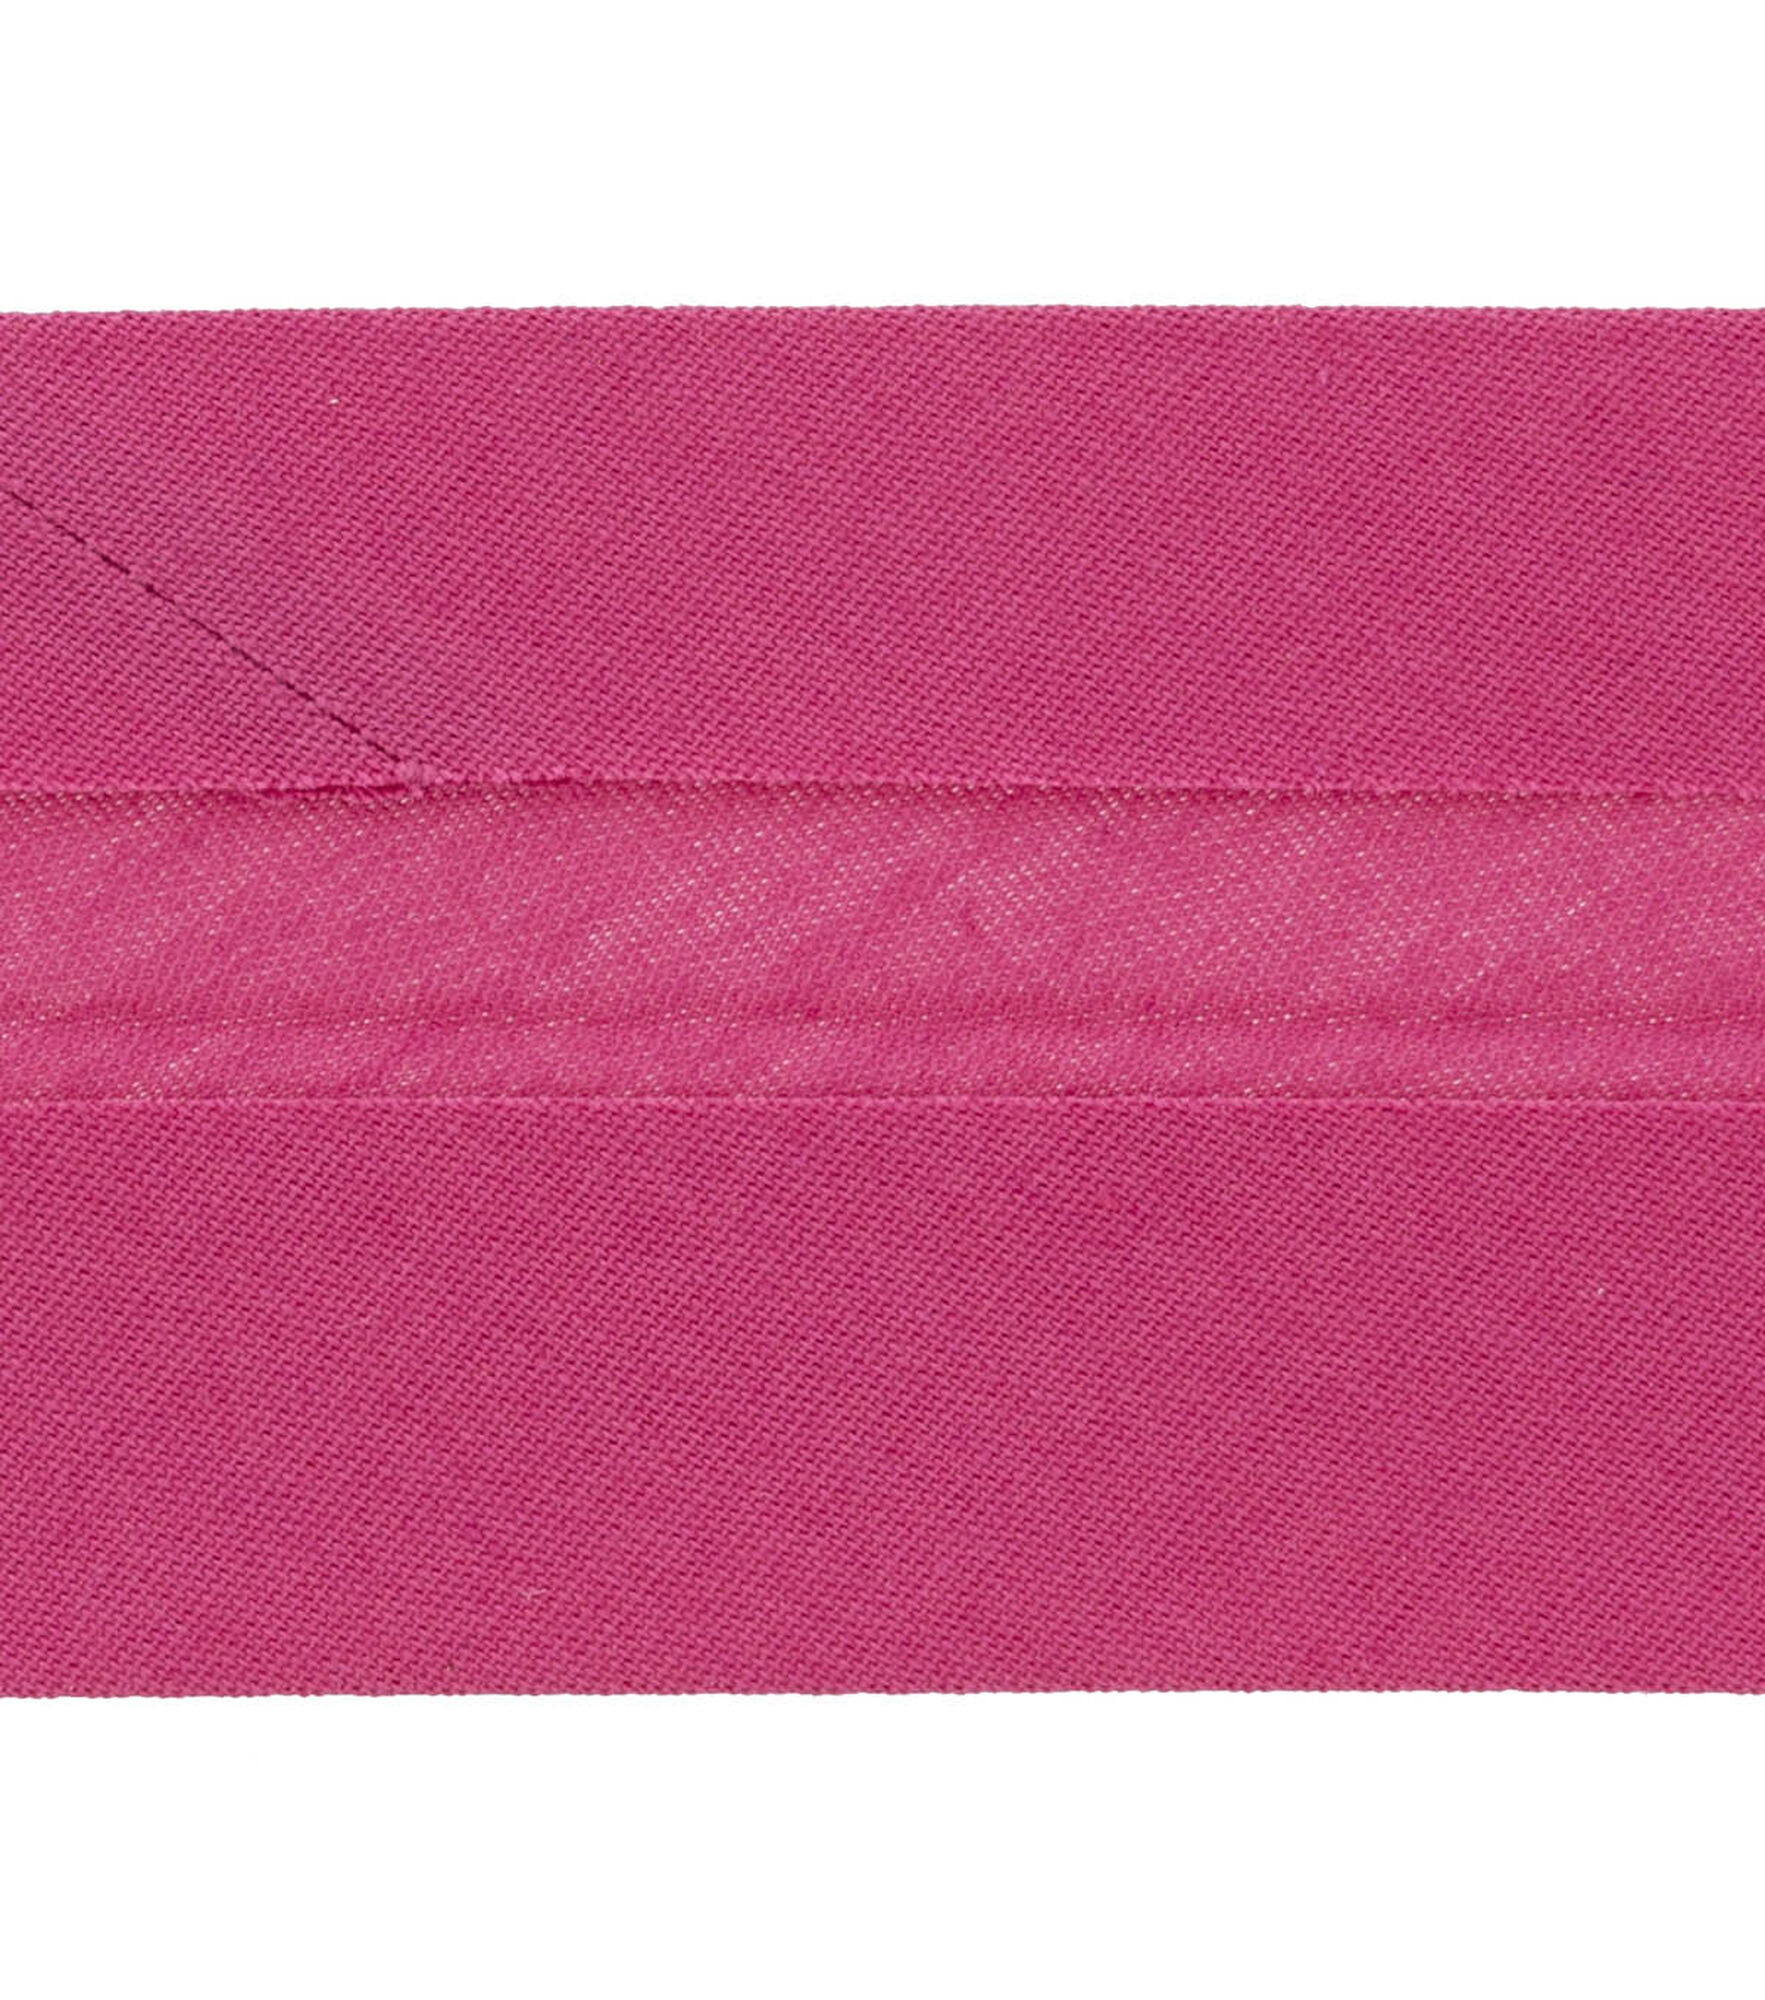 Wrights 7/8" x 3yd Double Fold Quilt Binding, Hot Magenta, hi-res